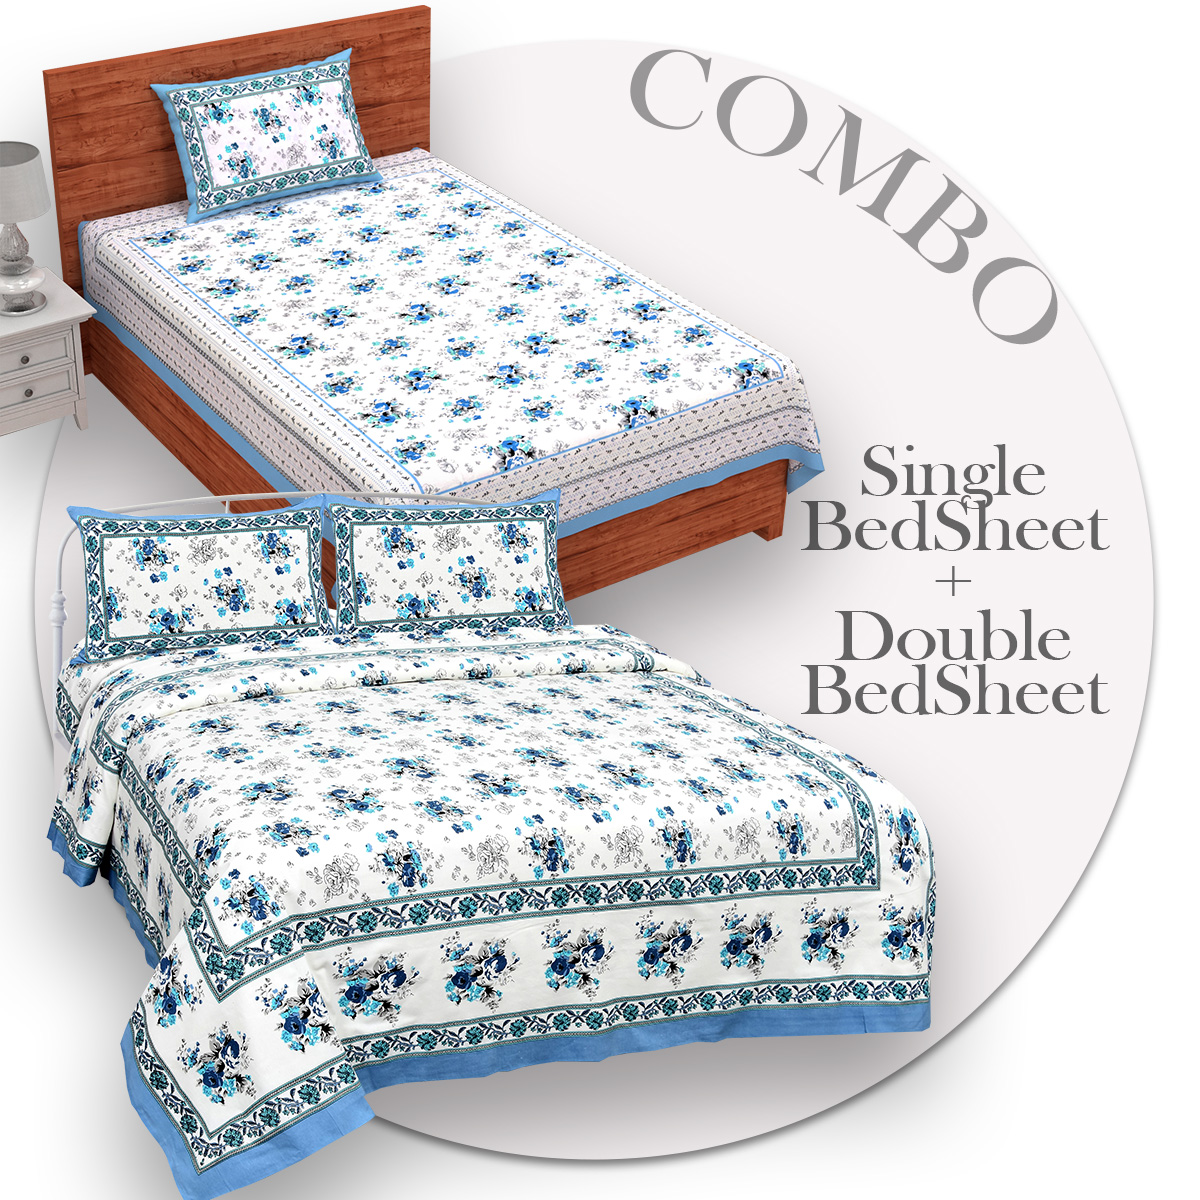 COMBO368 Beautiful Blue Colour Combo Set of 1 Single and 1 Double Bedsheet With 3 Pillow Cover